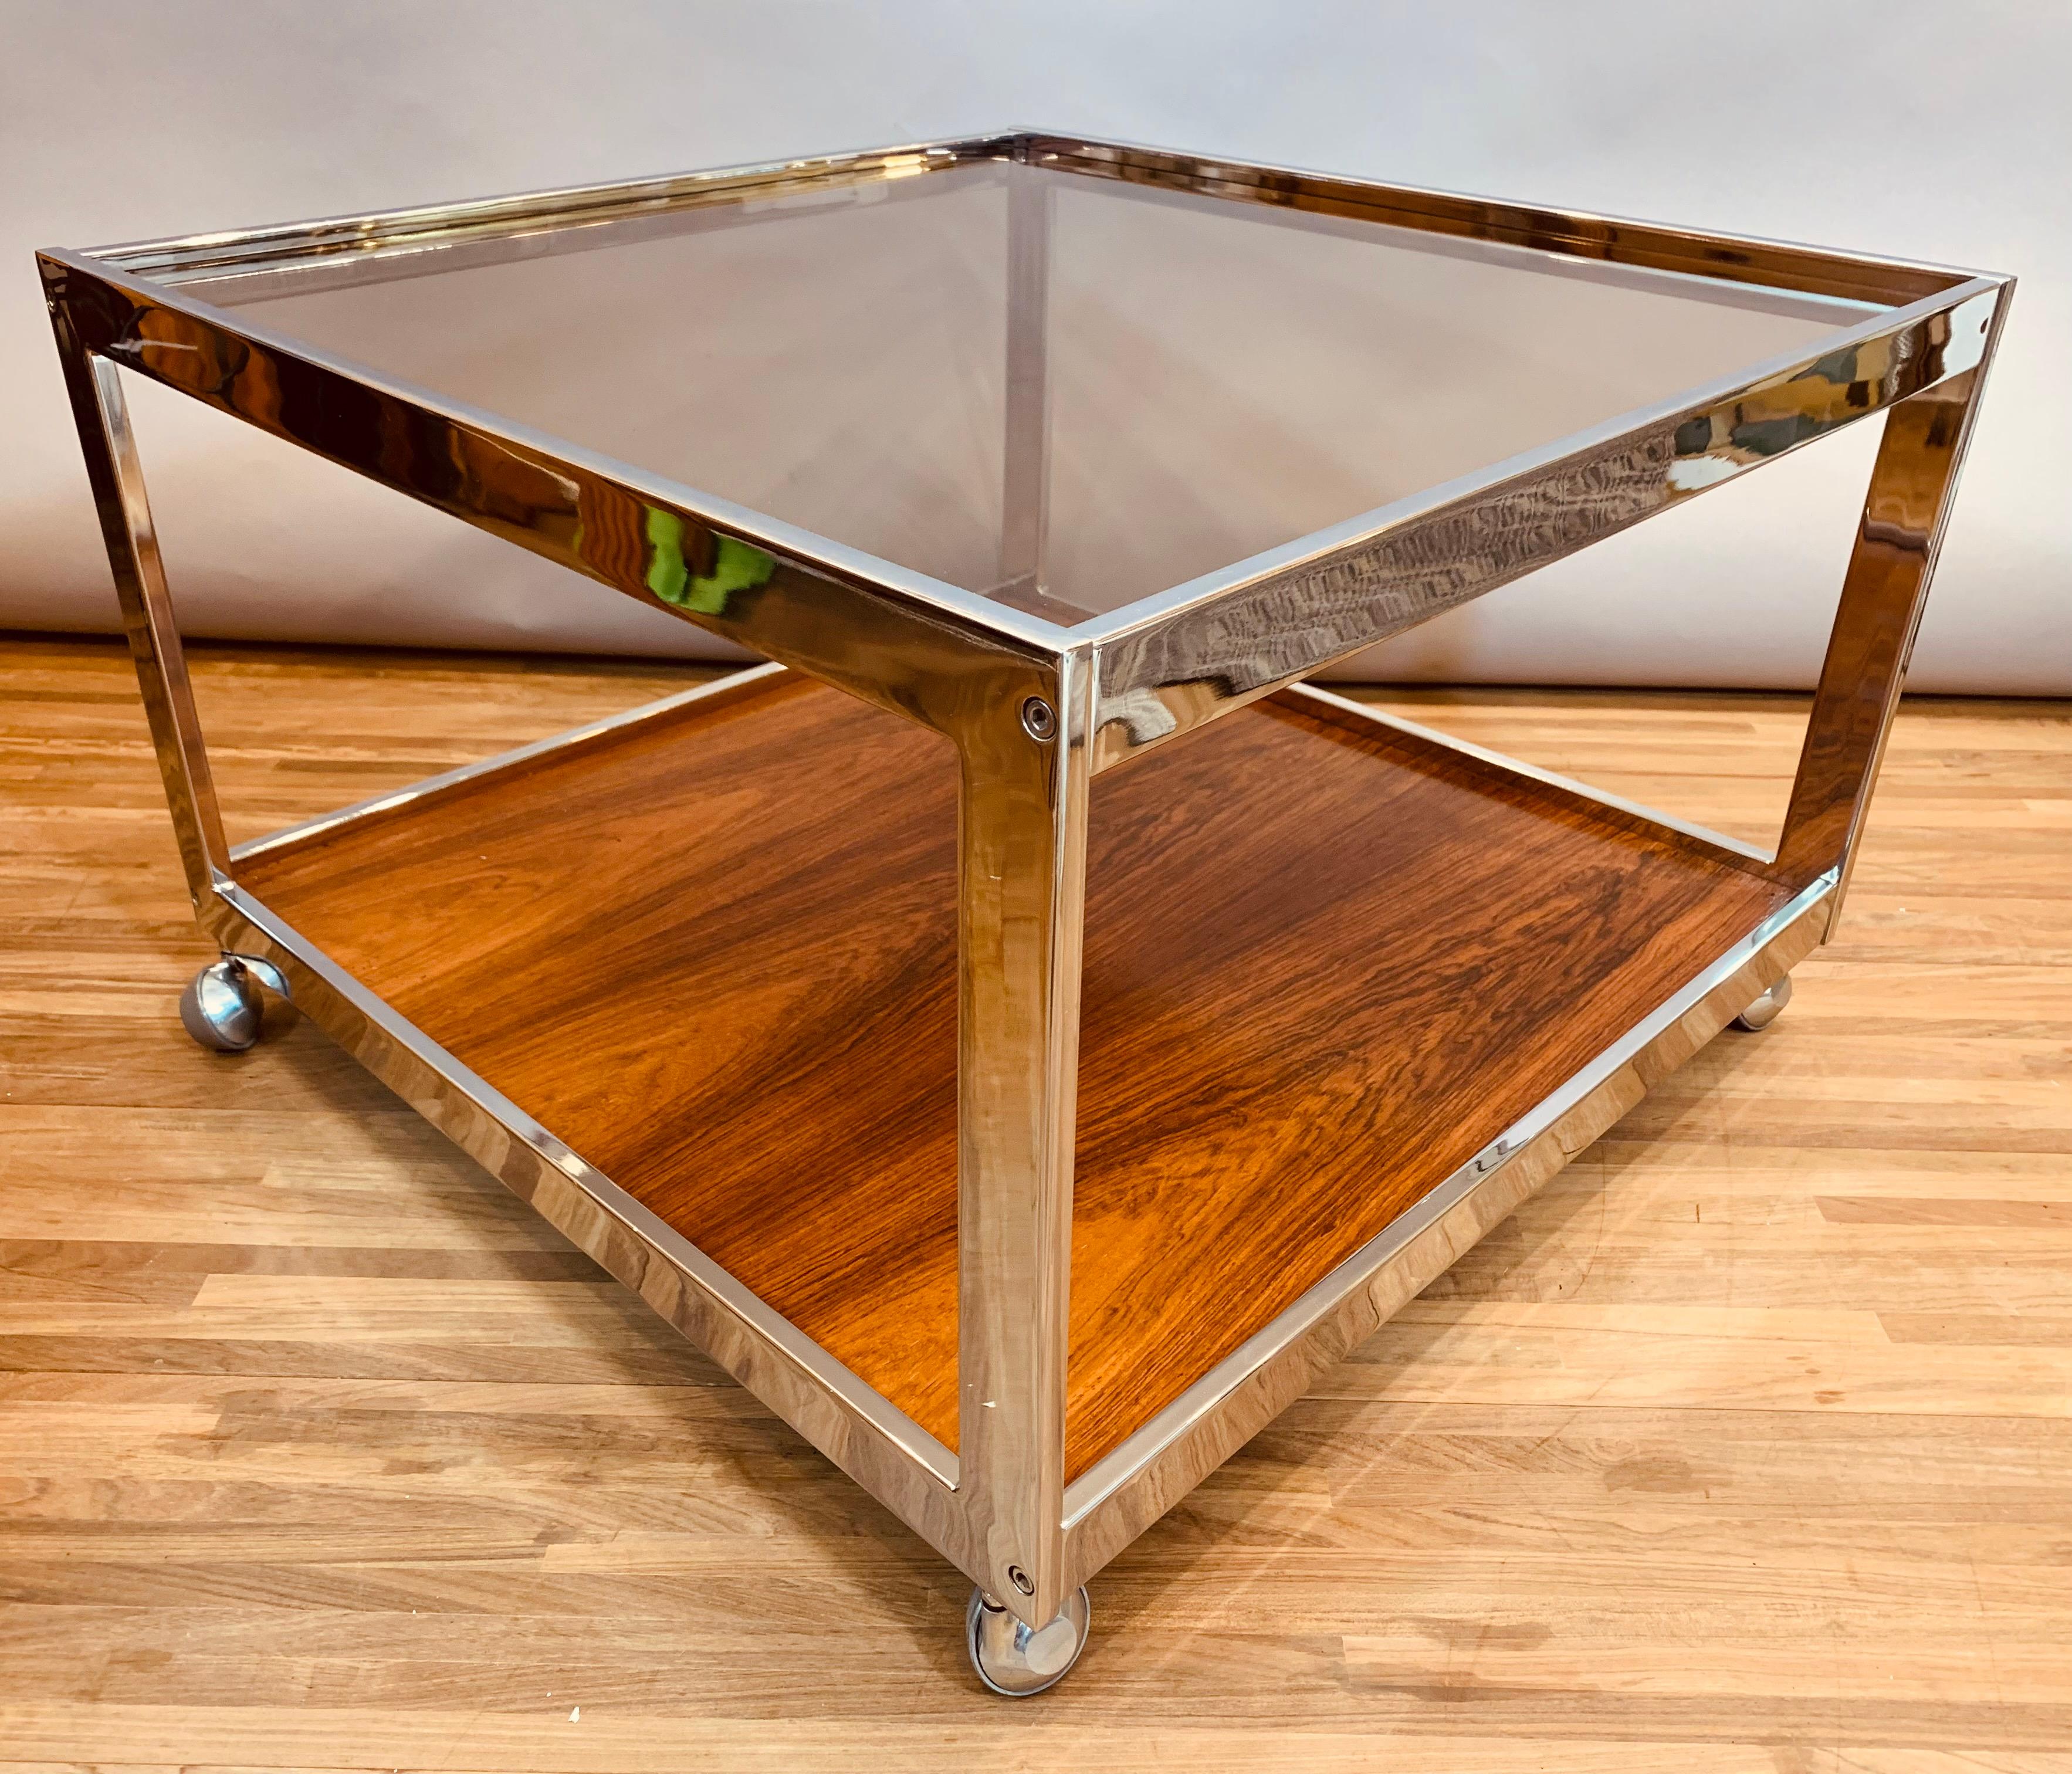 Polished 1970s Vintage Howard Miller Square Smoked Glass, Chrome & Rosewood Coffee Table